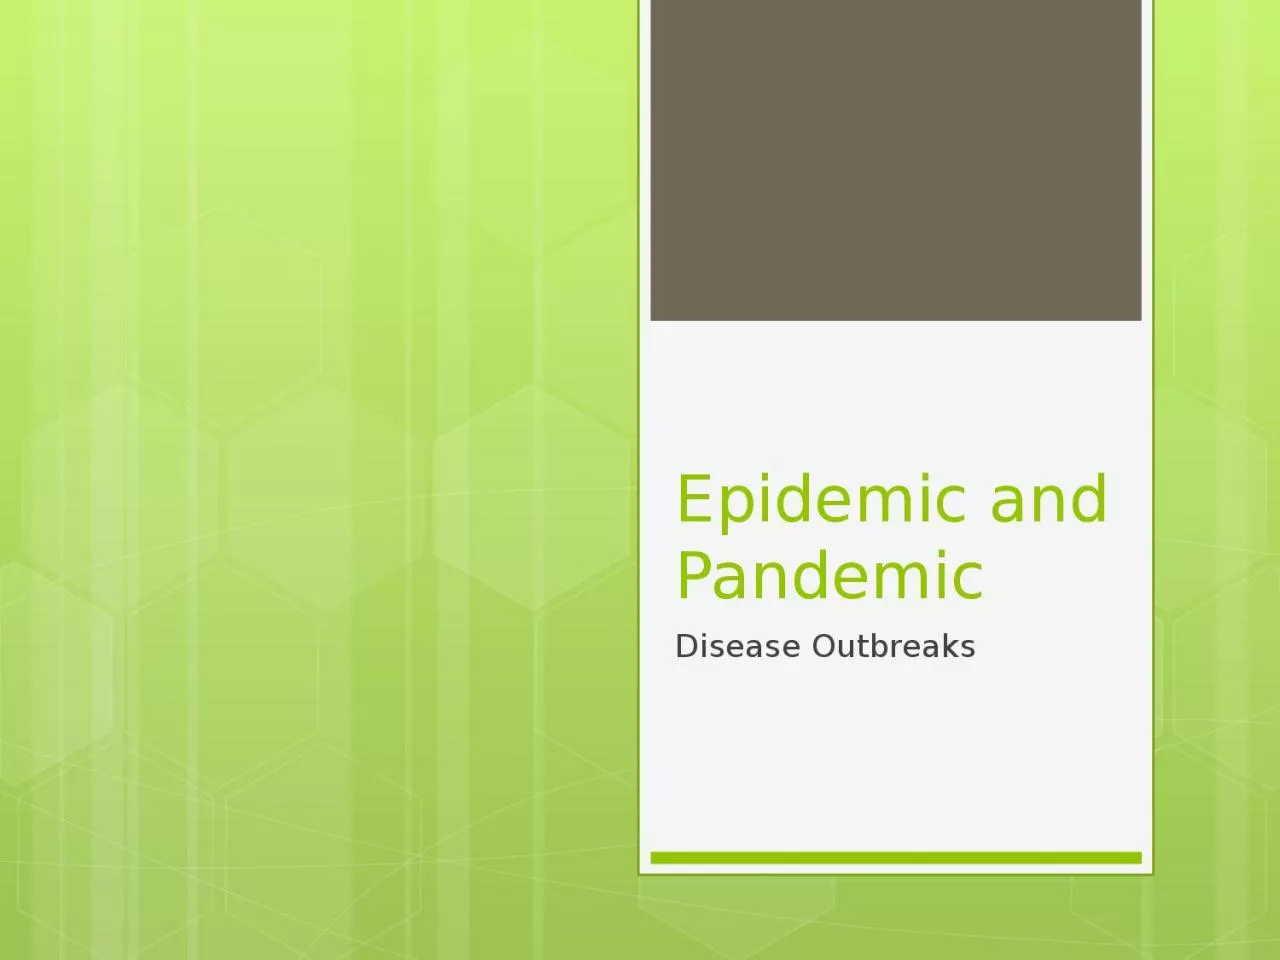 Epidemic and Pandemic Disease Outbreaks